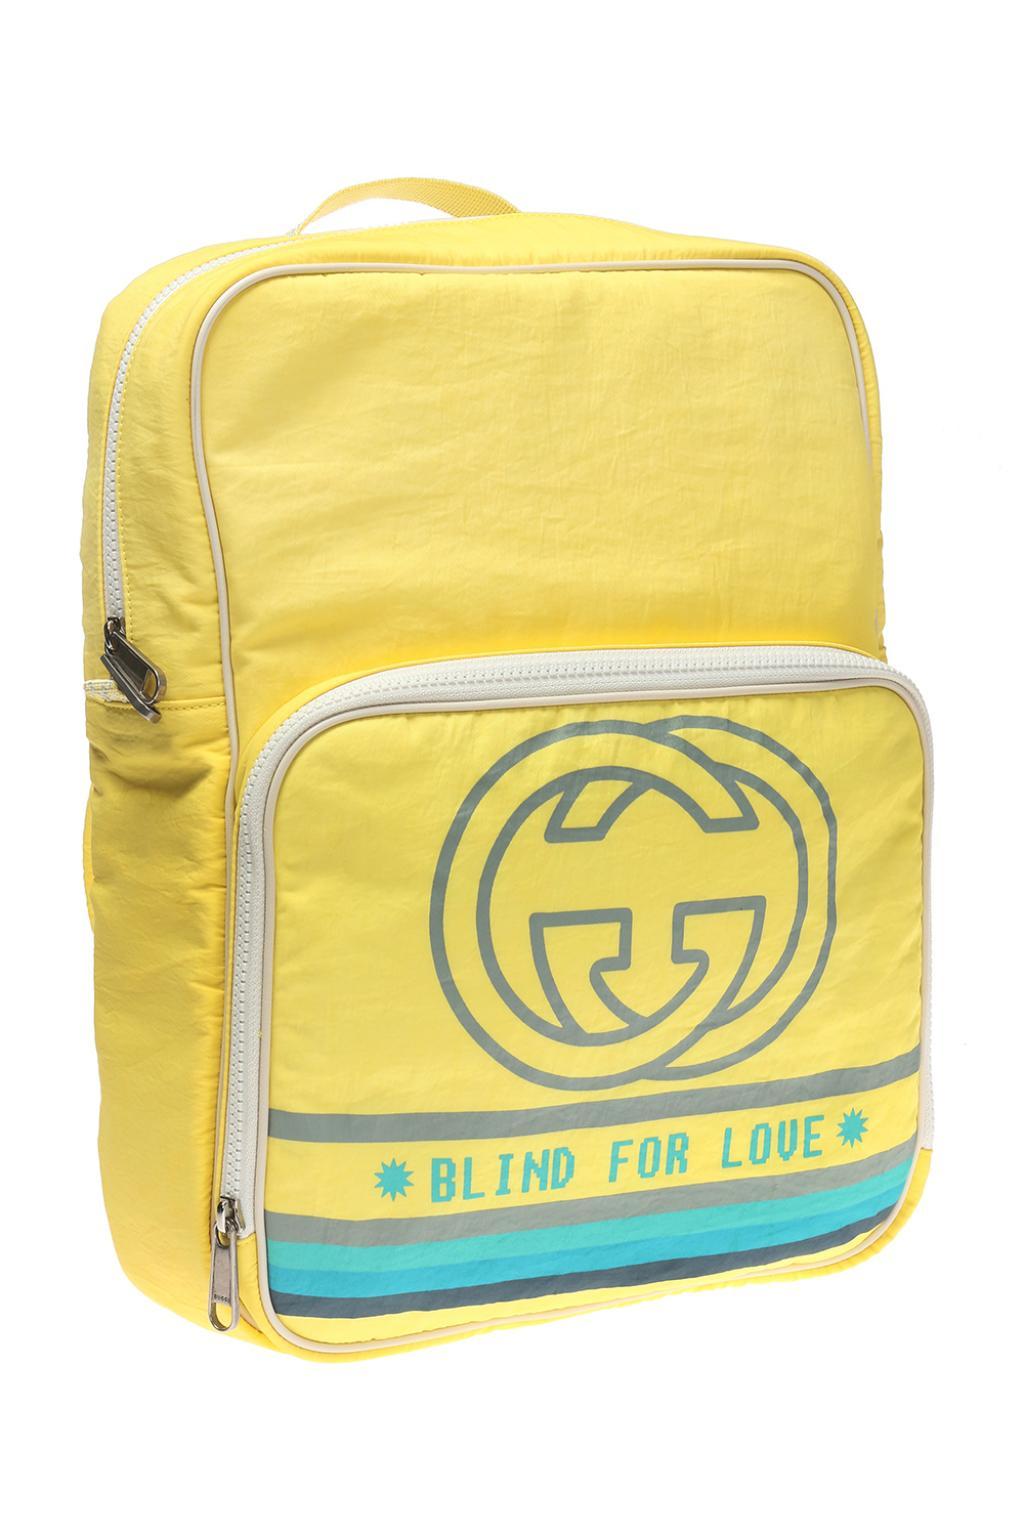 gucci yellow backpack